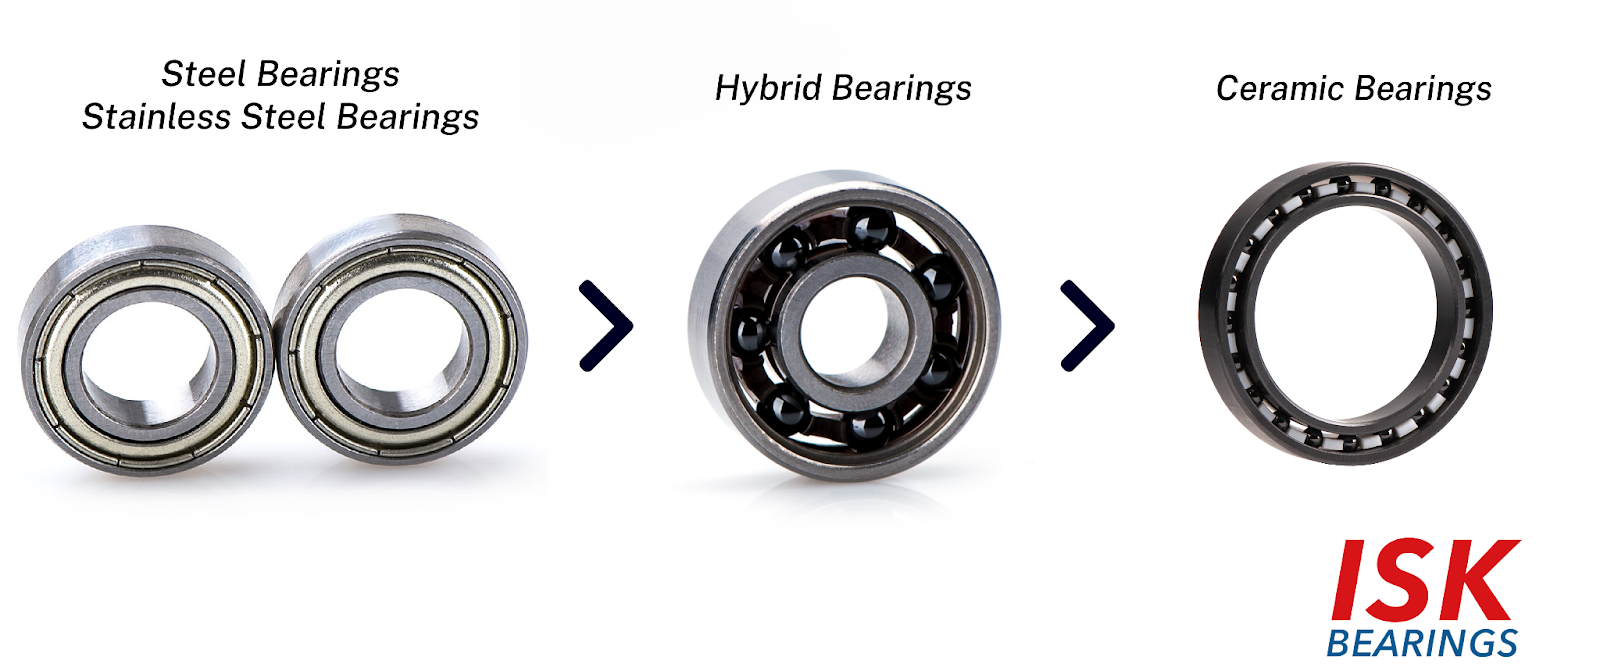 Comparison of Load Capacity in Electric Bicycle Bearings